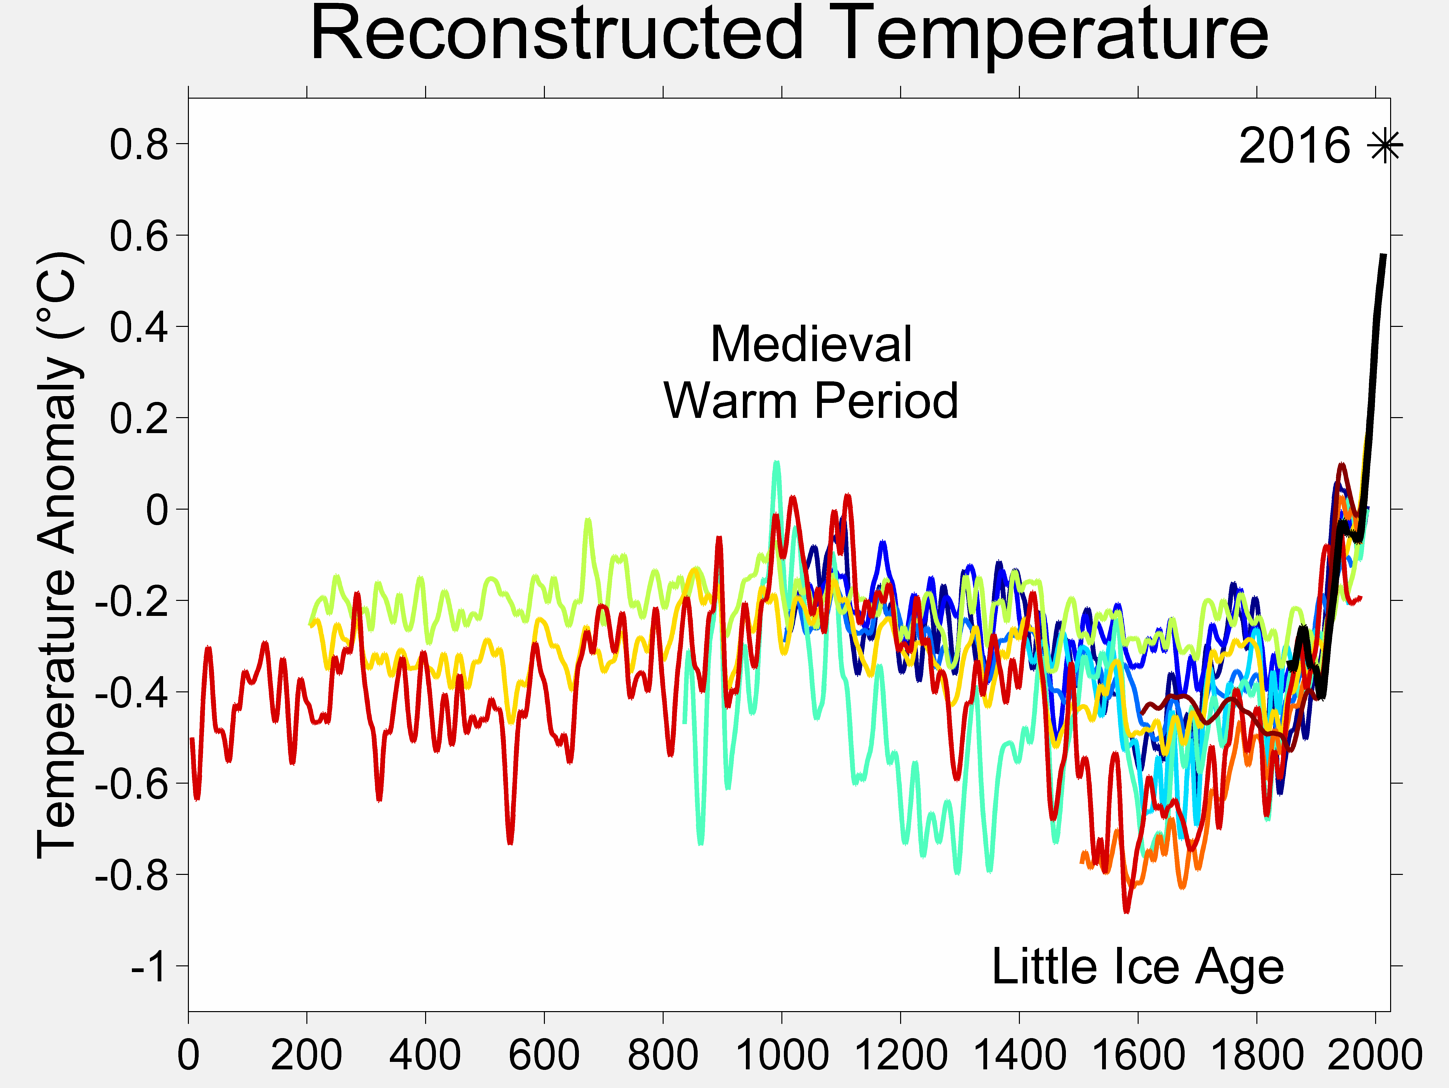 File2000 Year Temperature Comparisonpng No higher resolution available